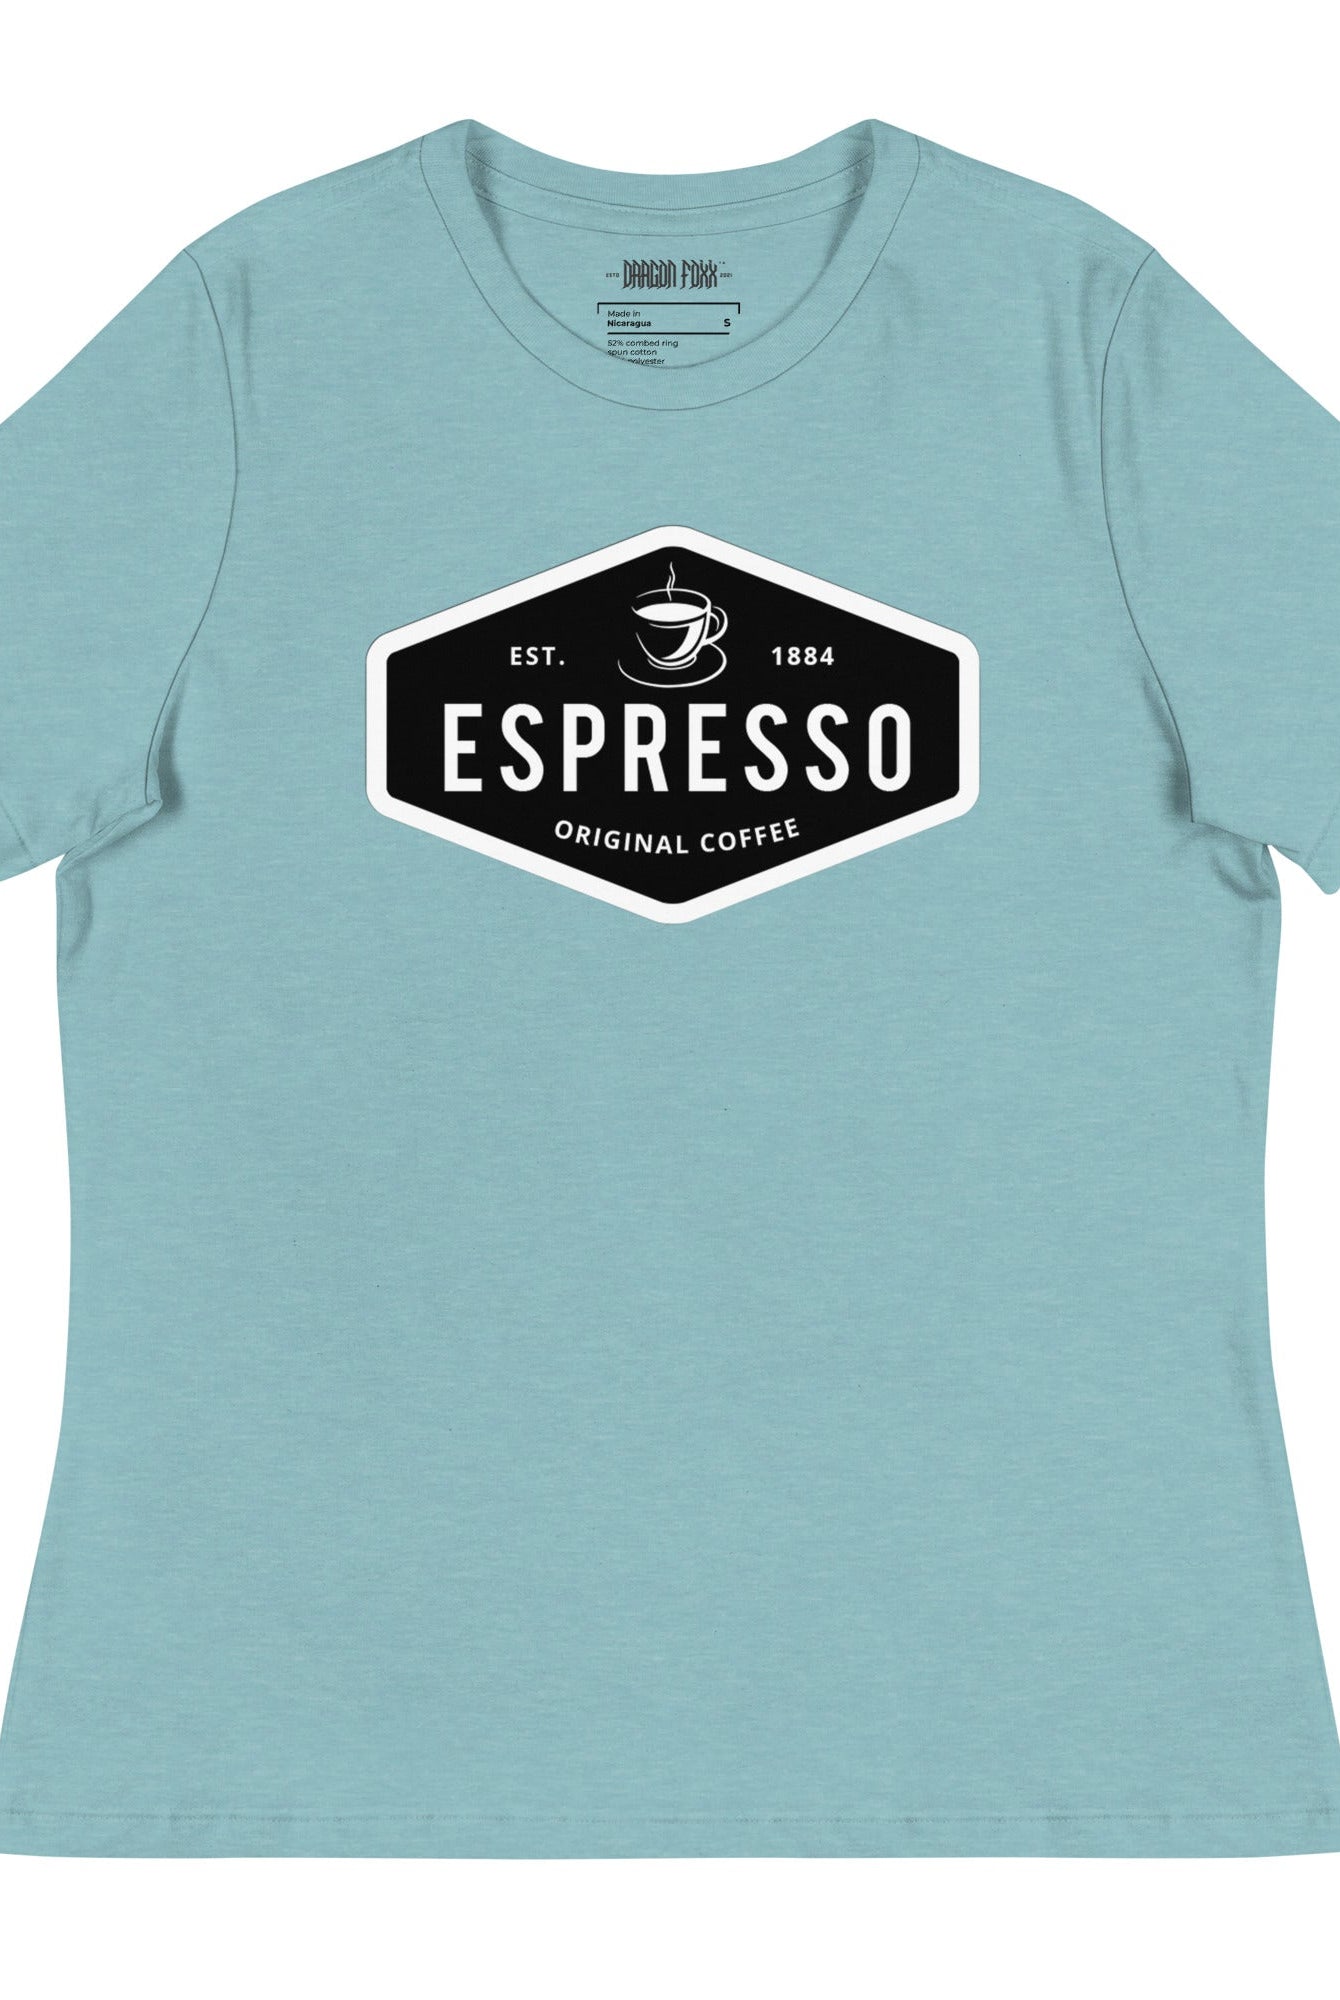 ESPRESSO - Women's Relaxed Fit Graphic T-Shirt in 16 Colors - Women's Relaxed Fit Graphic T-Shirt - DRAGON FOXX™ - 7218598_14258 - Heather Blue Lagoon - S - Athletic Heather T-shirt - Berry T-shirt - Black T-shirt